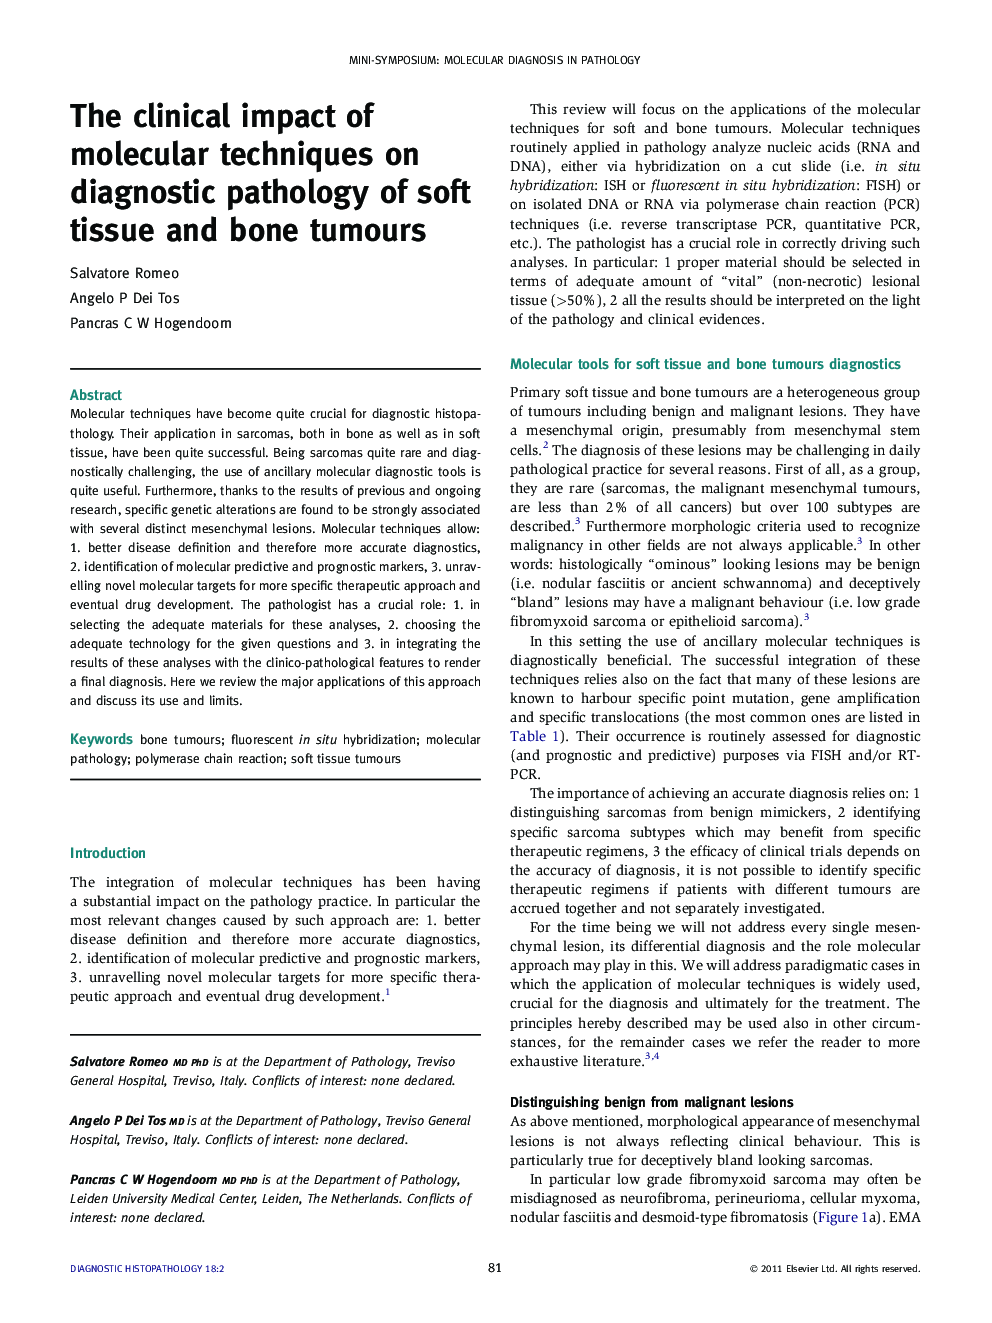 The clinical impact of molecular techniques on diagnostic pathology of soft tissue and bone tumours